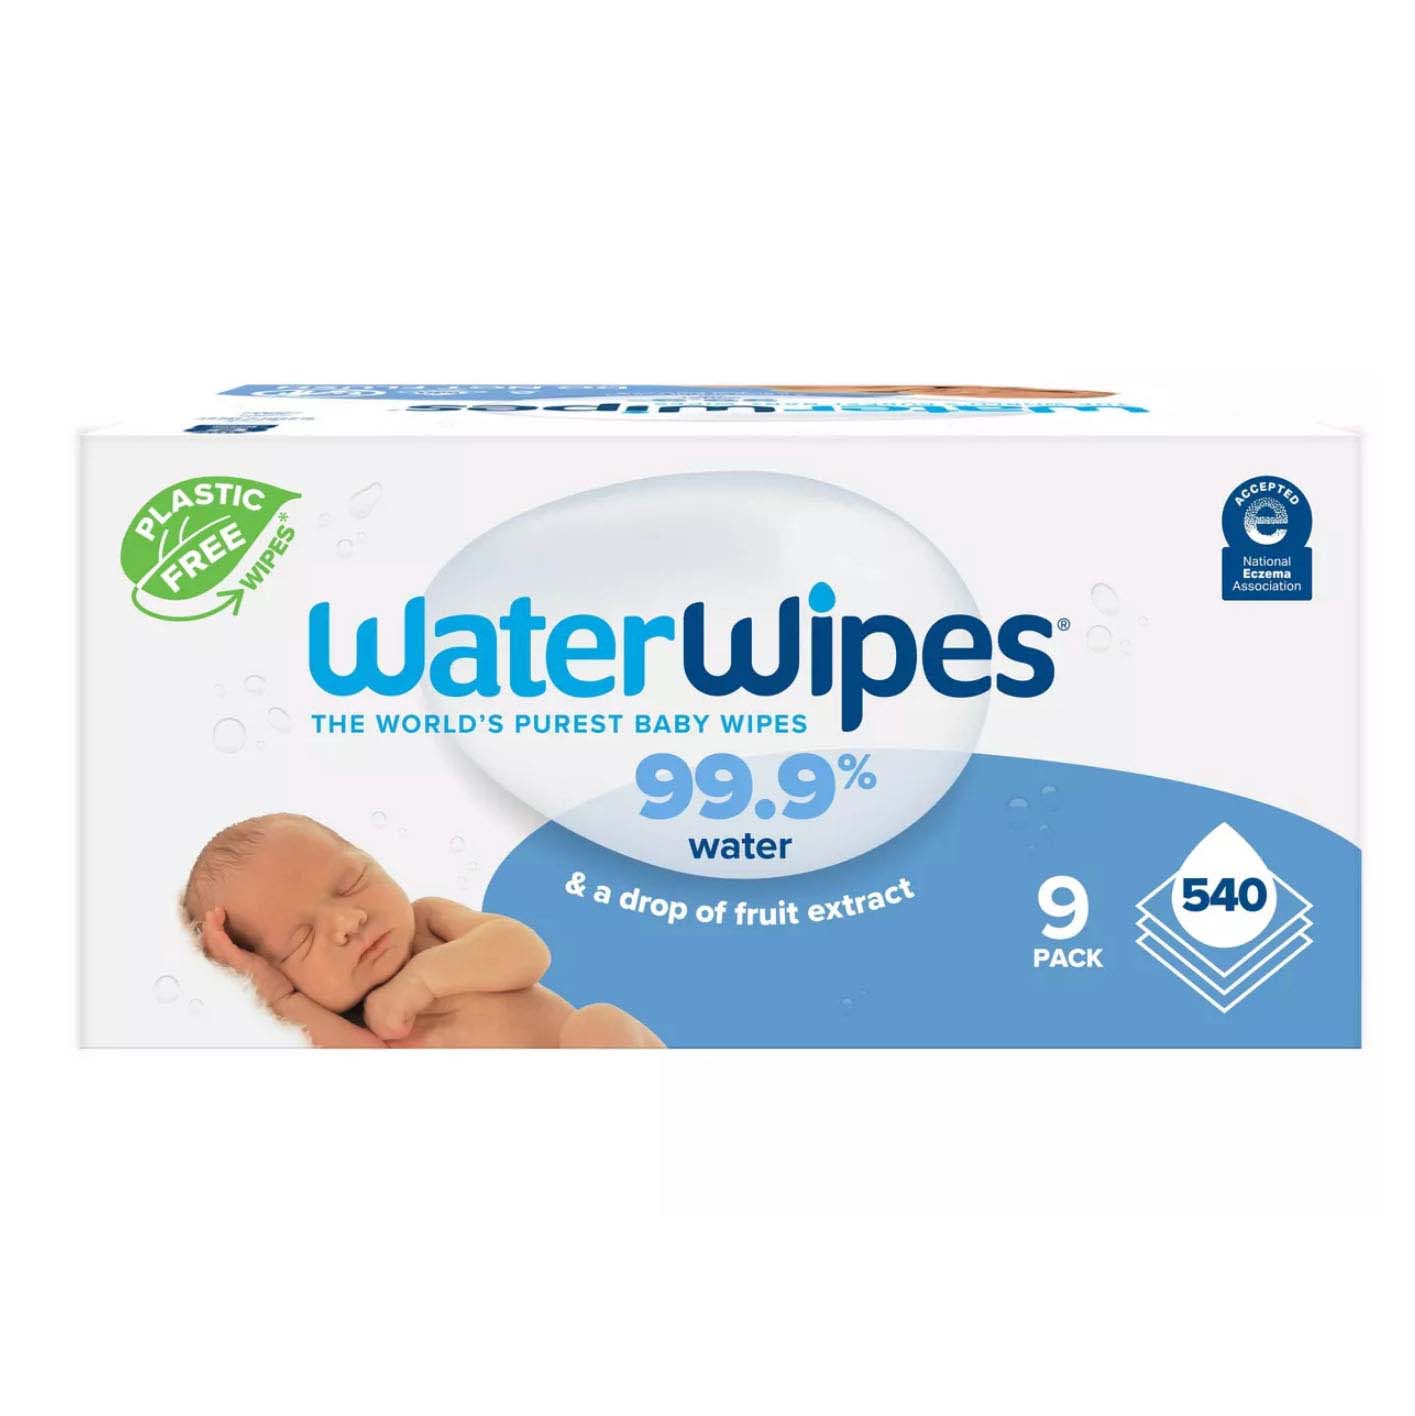 Baby wipes in blue and white box packaging